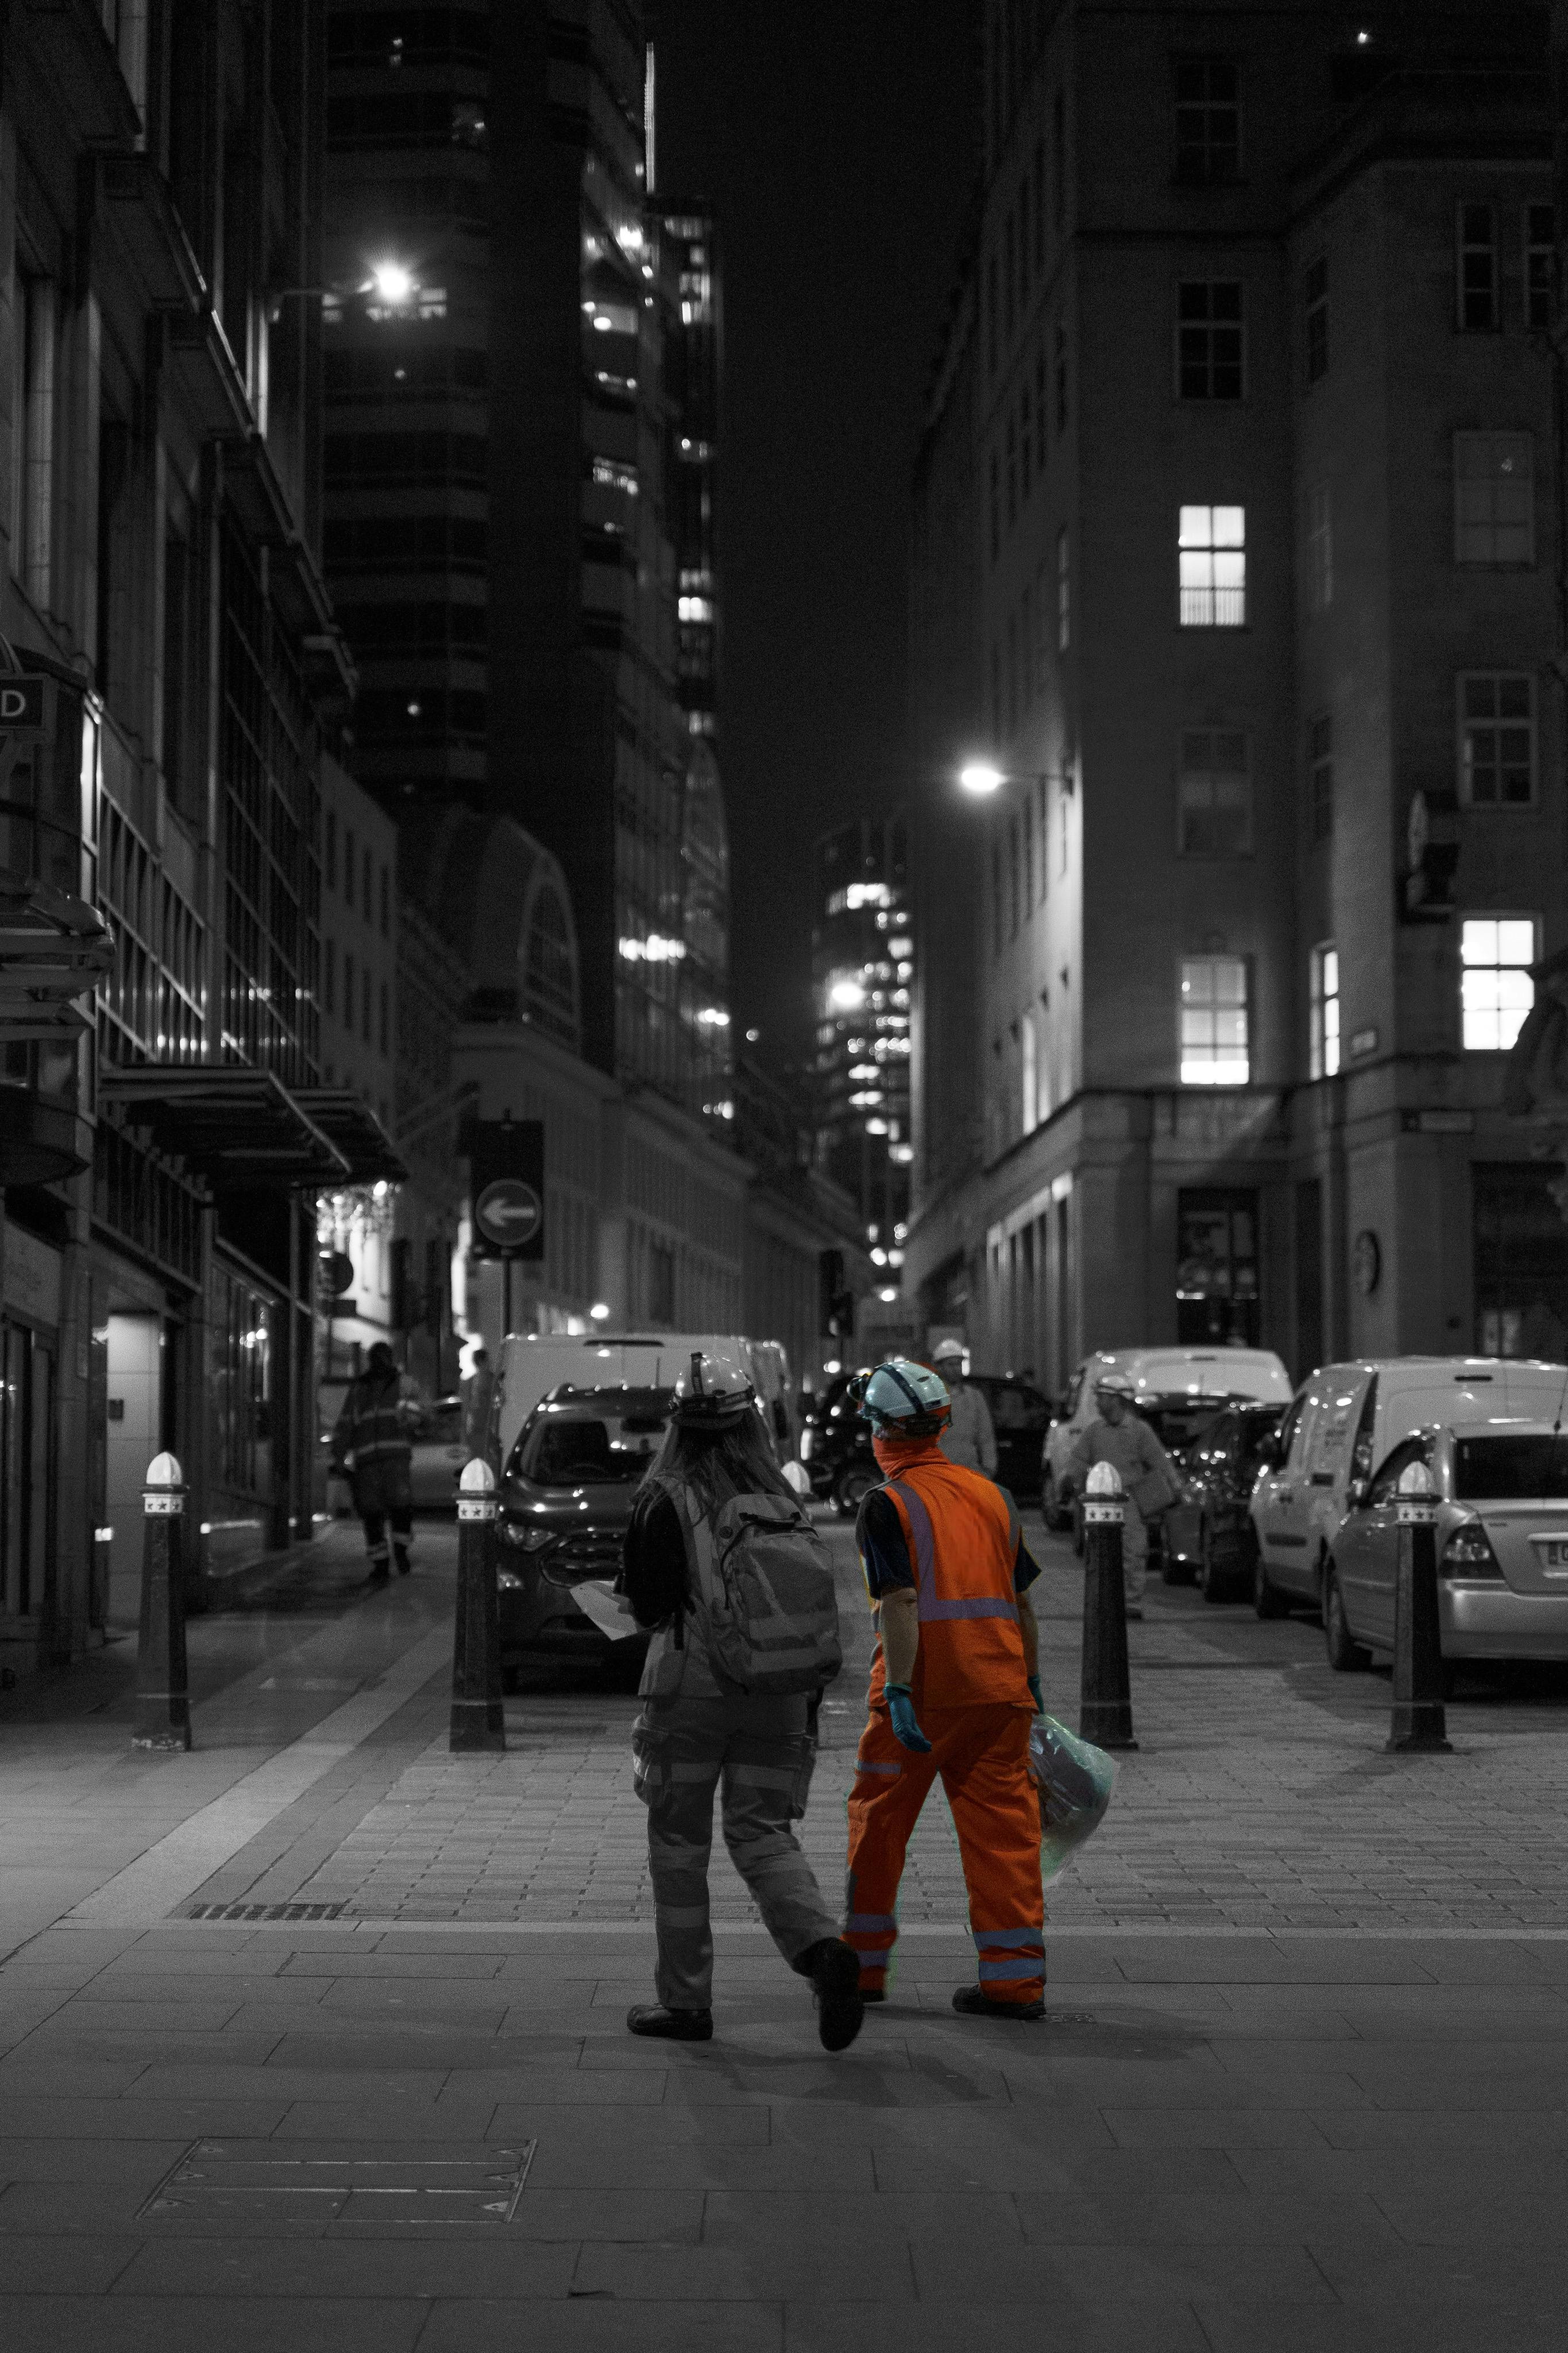 Two construction workers in protective clothing walking across a road at night in central London